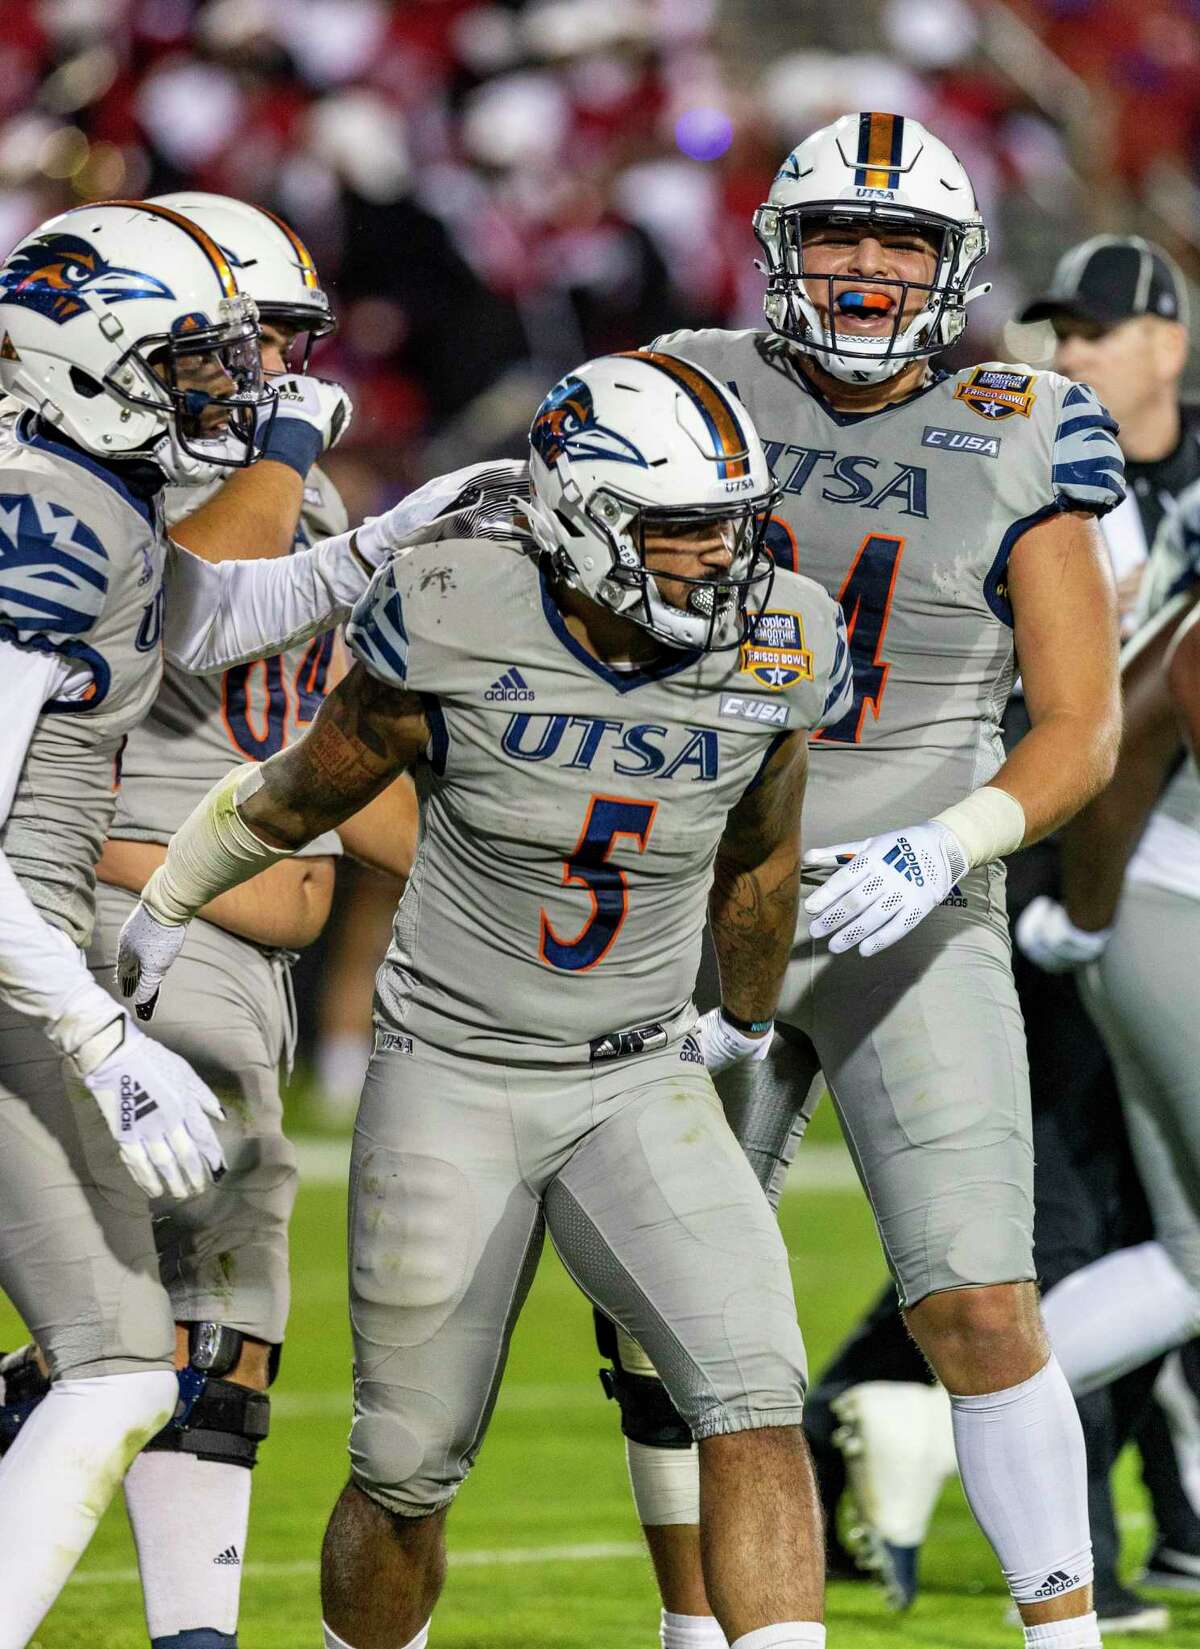 UTSA running back Brenden Brady celebrates Tuesday, Dec. 21, 2021, during the first half of the Tropical Smoothie Cafe Frisco Bowl in Frisco, Texas after scoring UTSA's second touchdown.